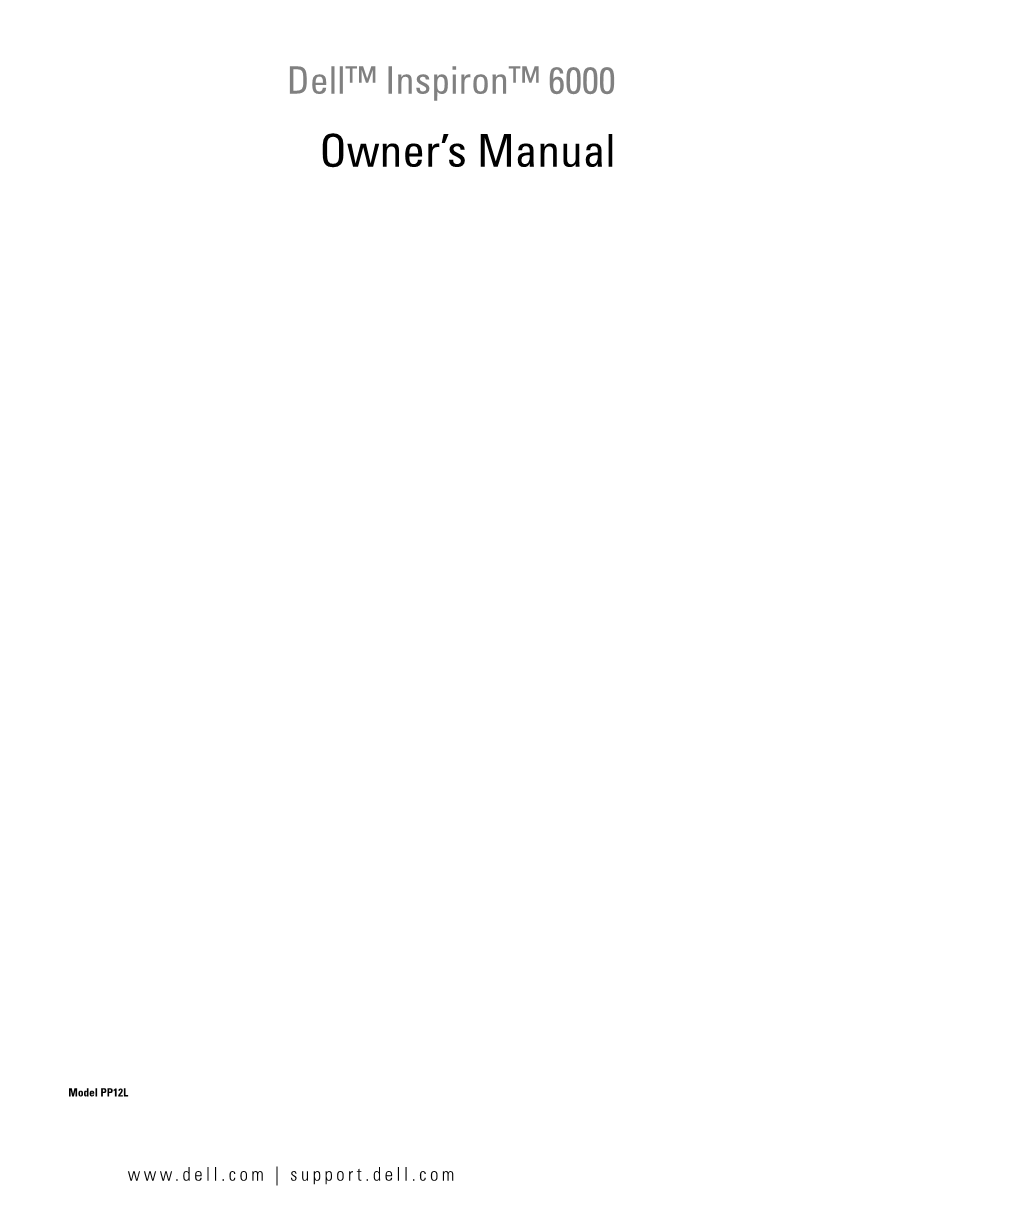 Inspiron 6000 Owner's Manual